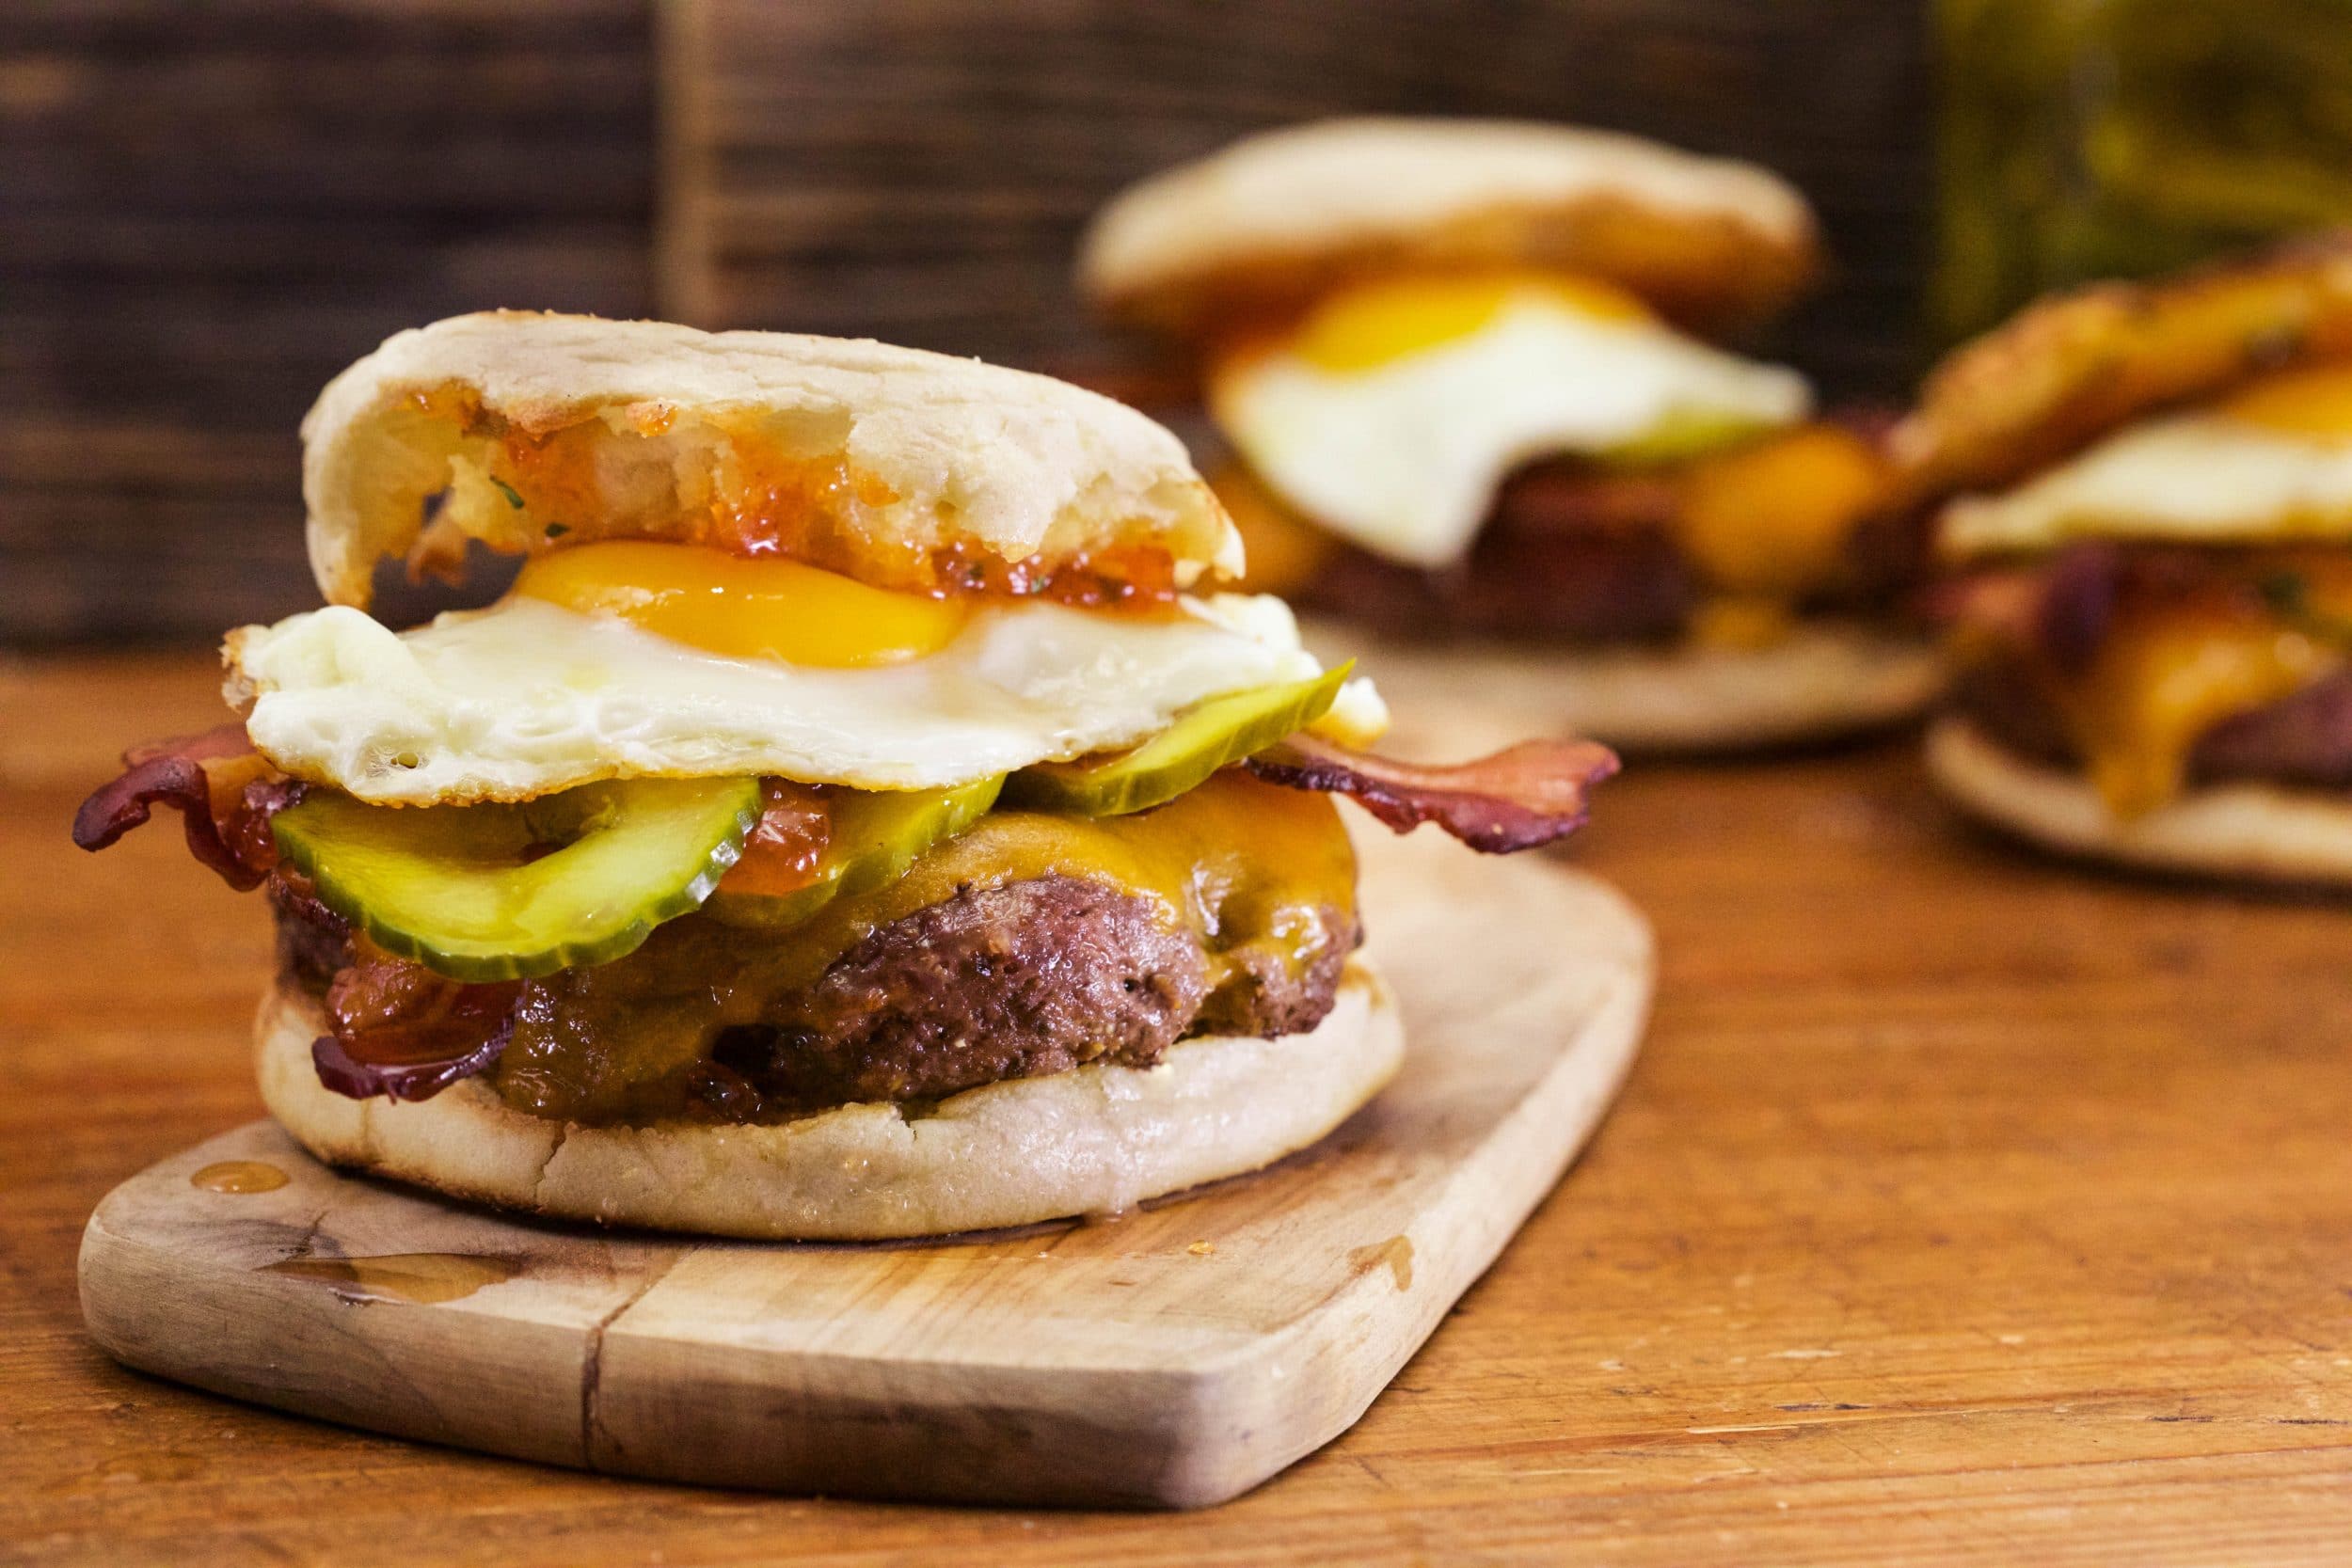 Old Bay Burgers with Bacon and Eggs on English Muffins